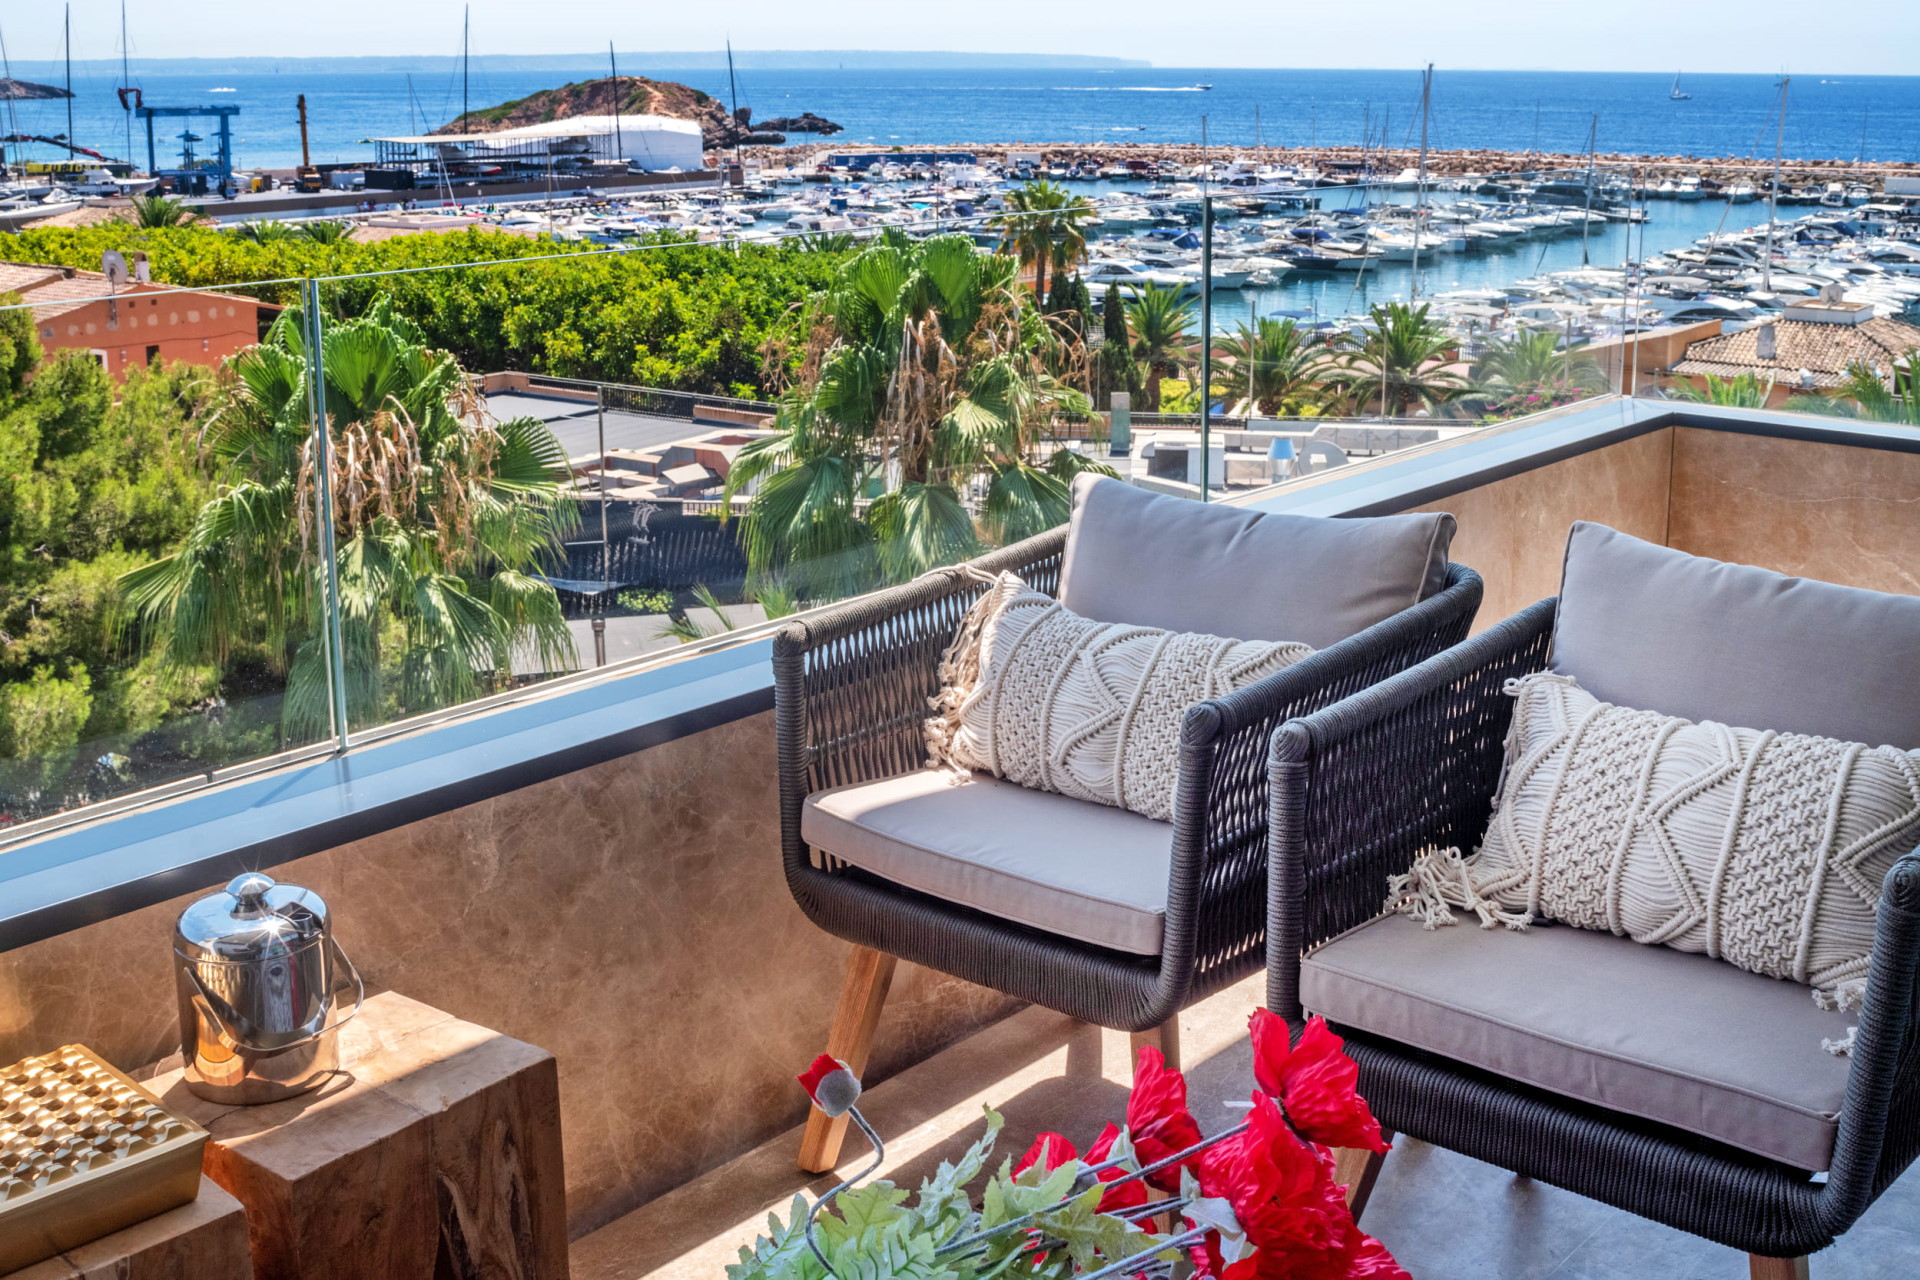 Portals Nous: Luxurious designer flat in first sea line with direct access to the marina